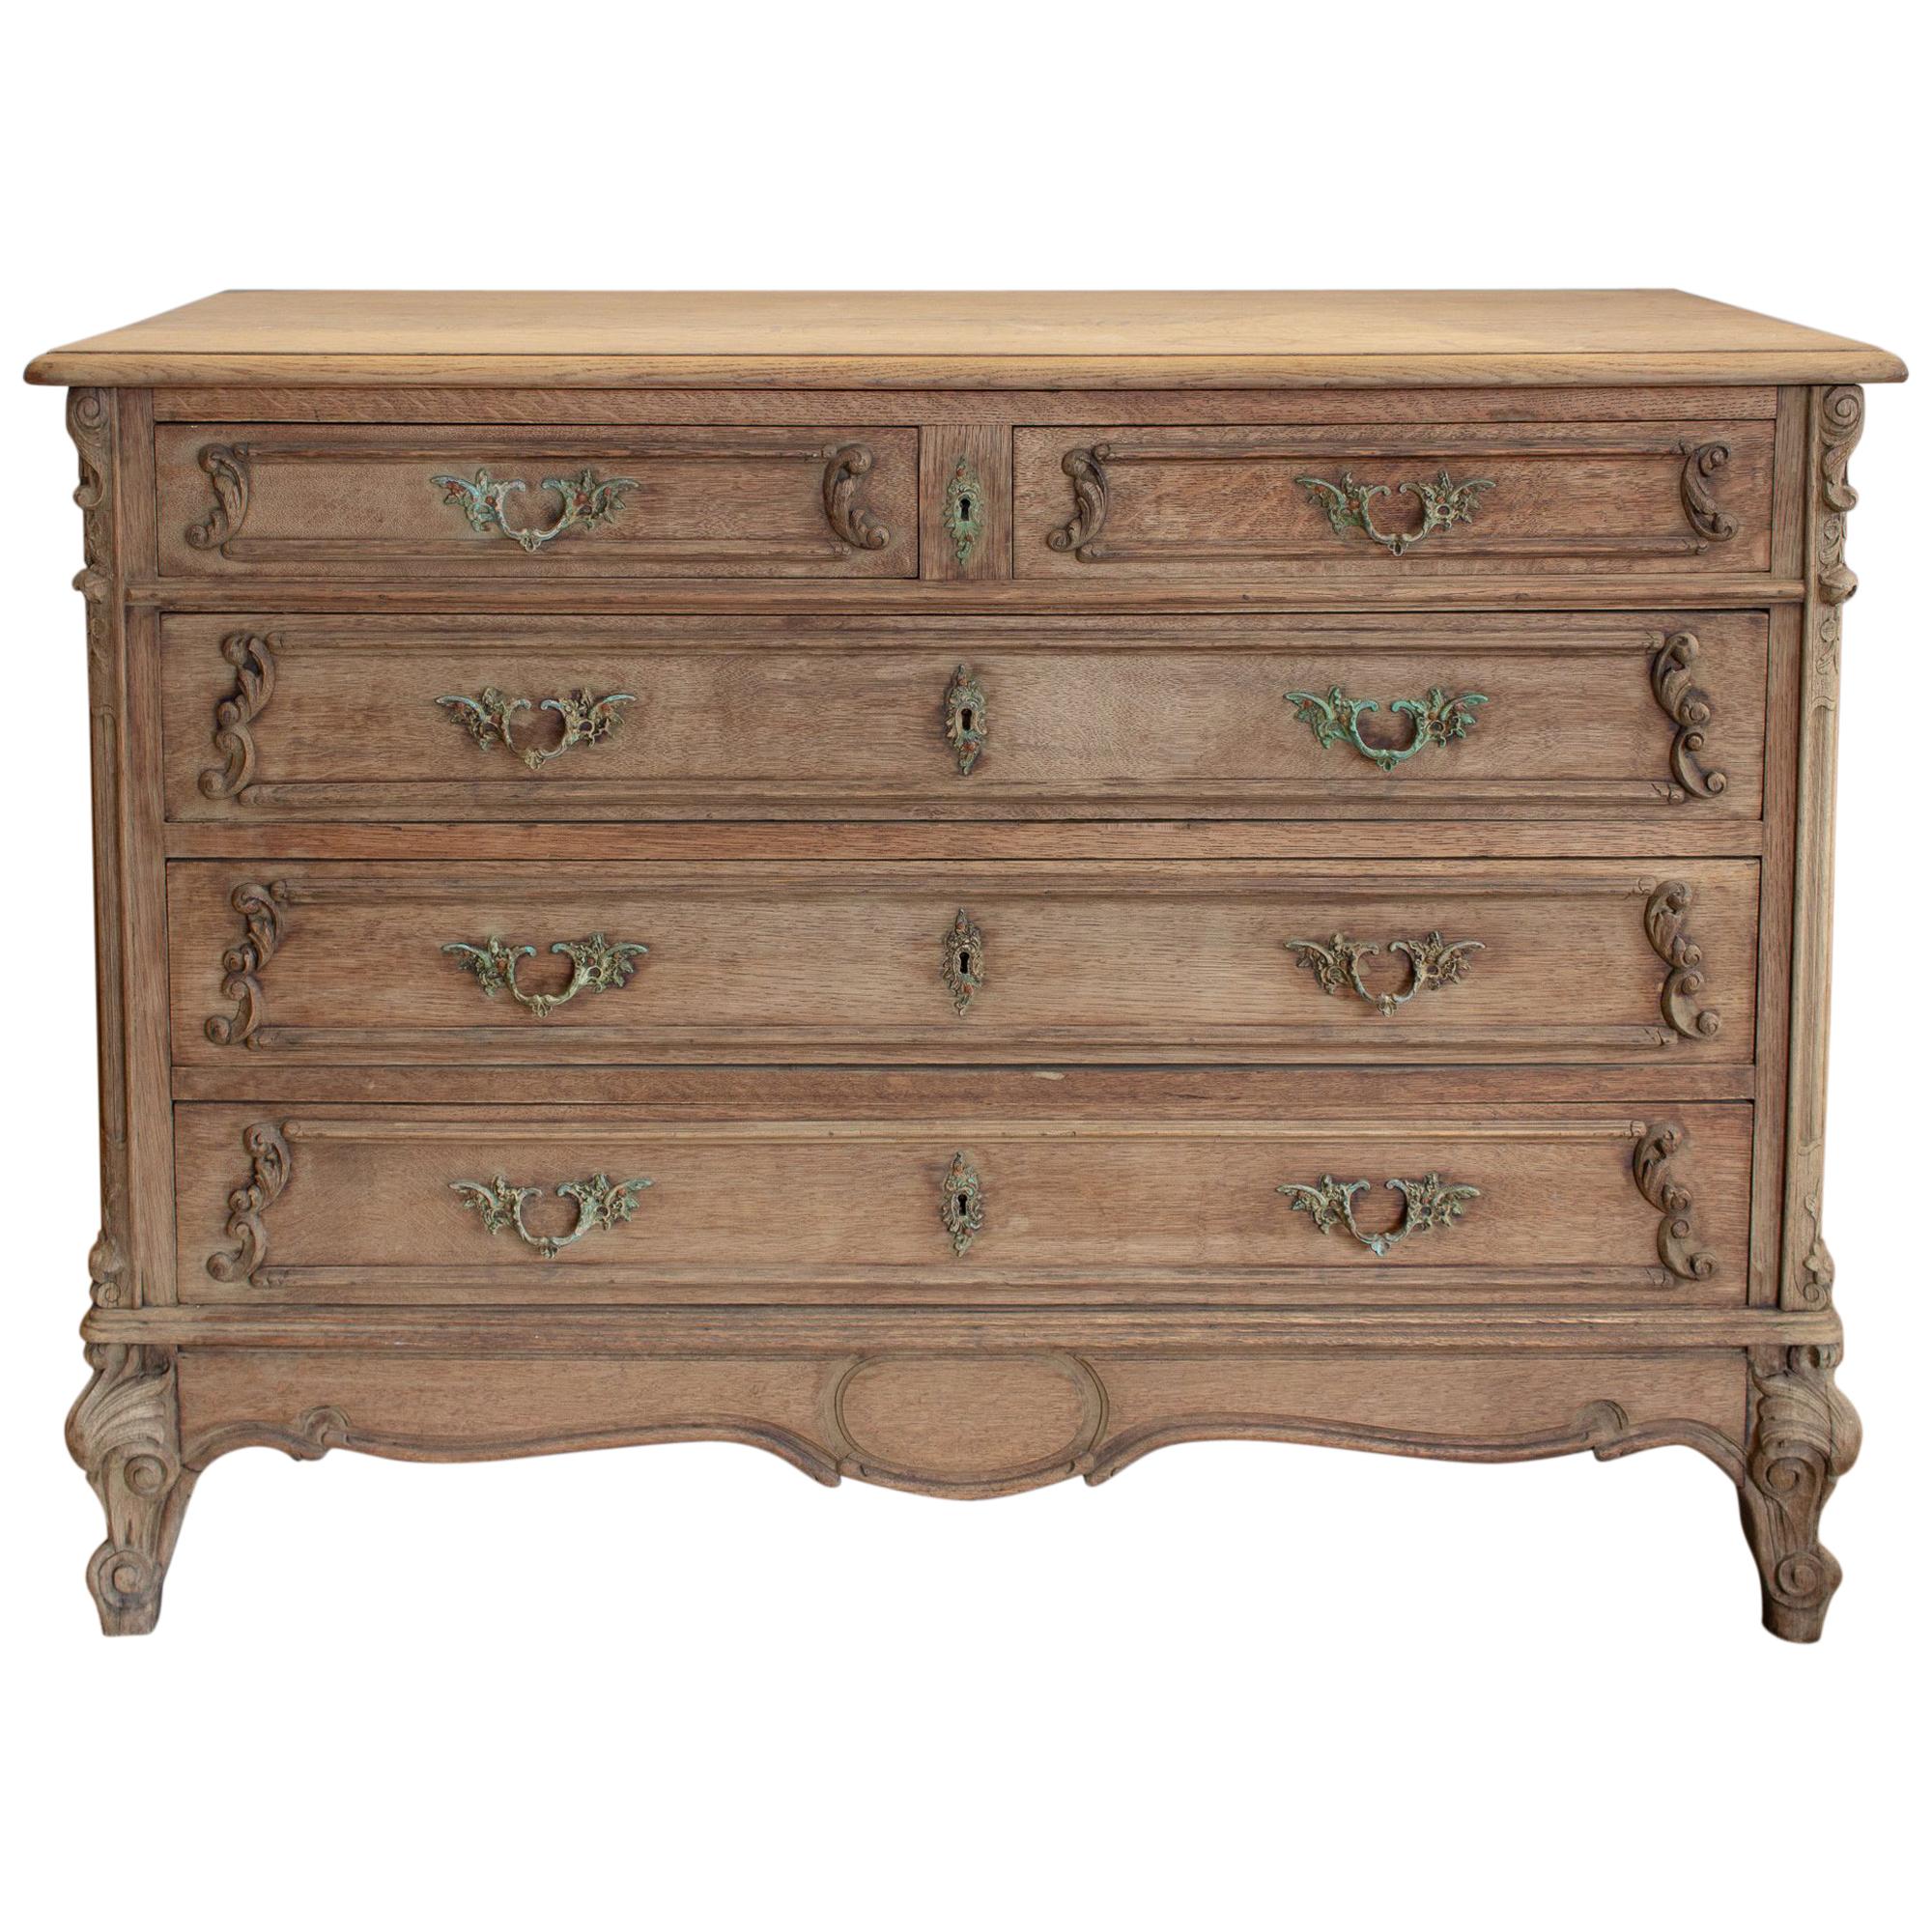 Antique French Stripped Wood Five-Drawer Commode with Detailed Carvings